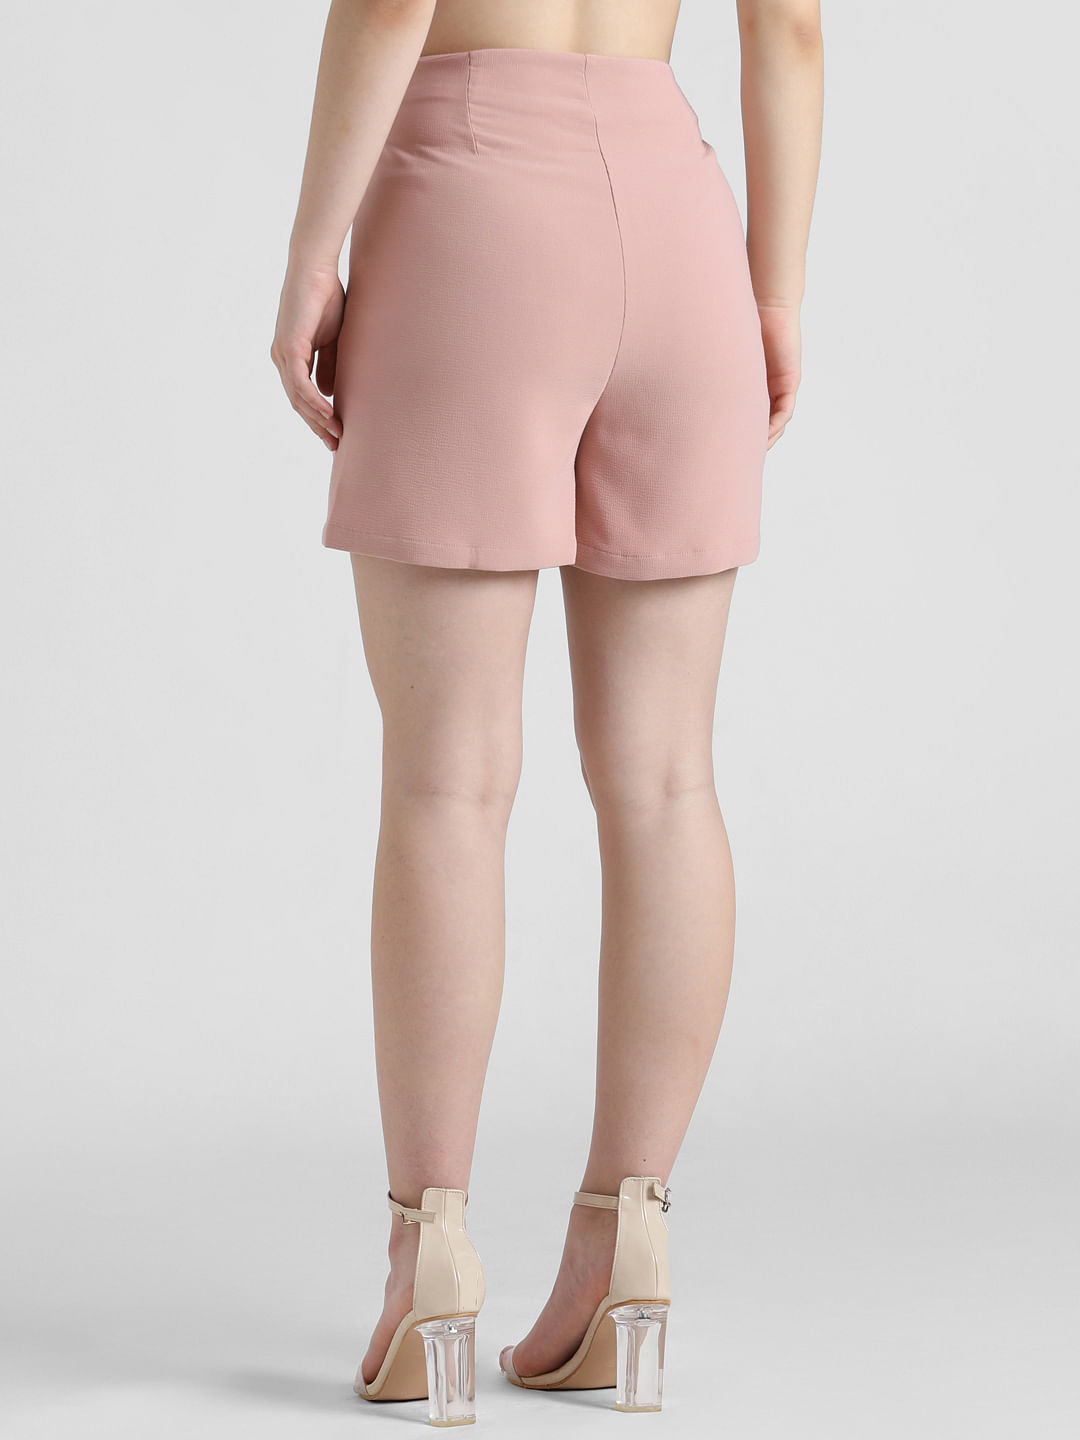 Pastel Mid-length Full Just this Sway Skirt | Unique skirts, High waisted  circle skirt, Pink midi skirt